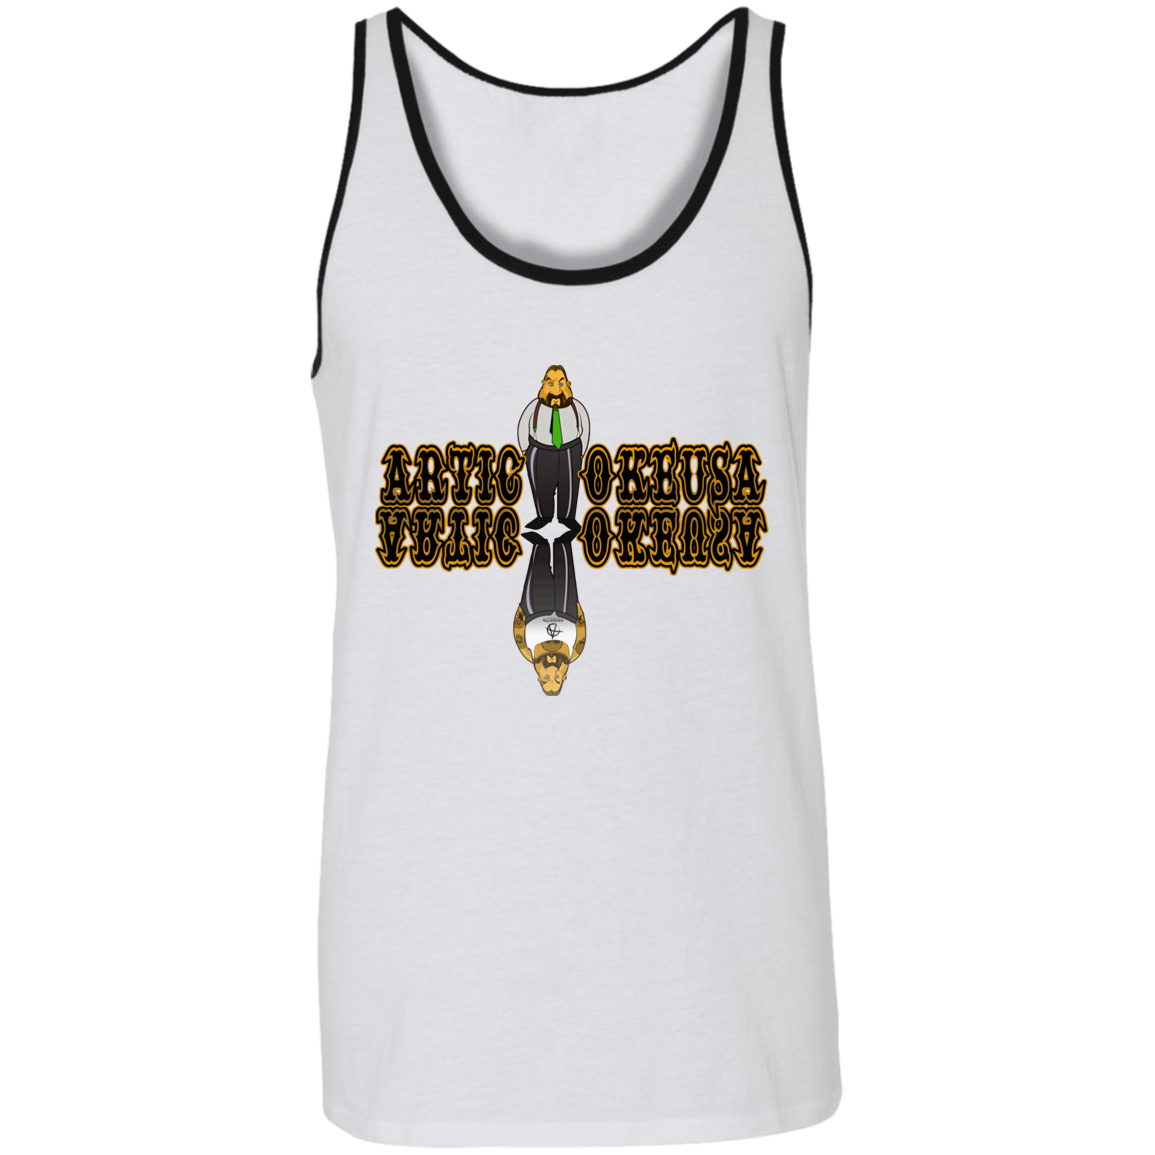 ArtichokeUSA Custom Design. Façade: (Noun) A false appearance that makes someone or something seem more pleasant or better than they really are.  Unisex Tank